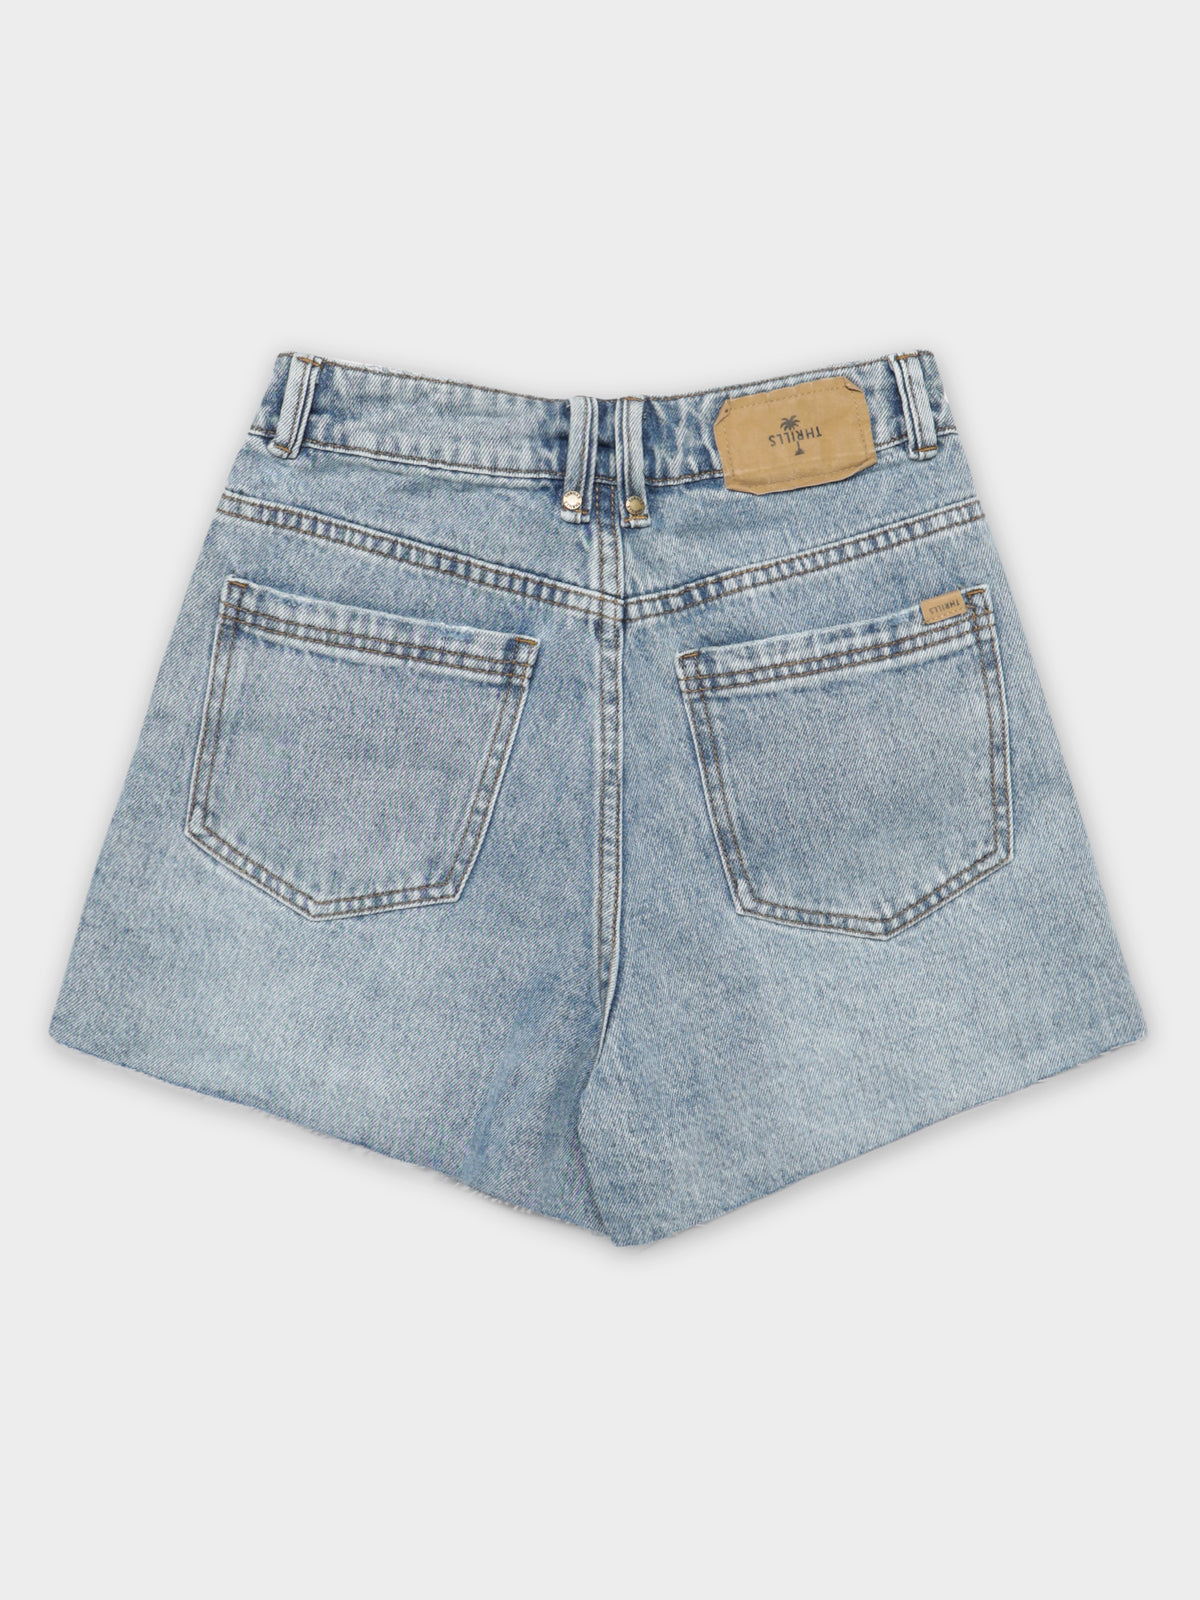 Erica Shorts in Aged Blue